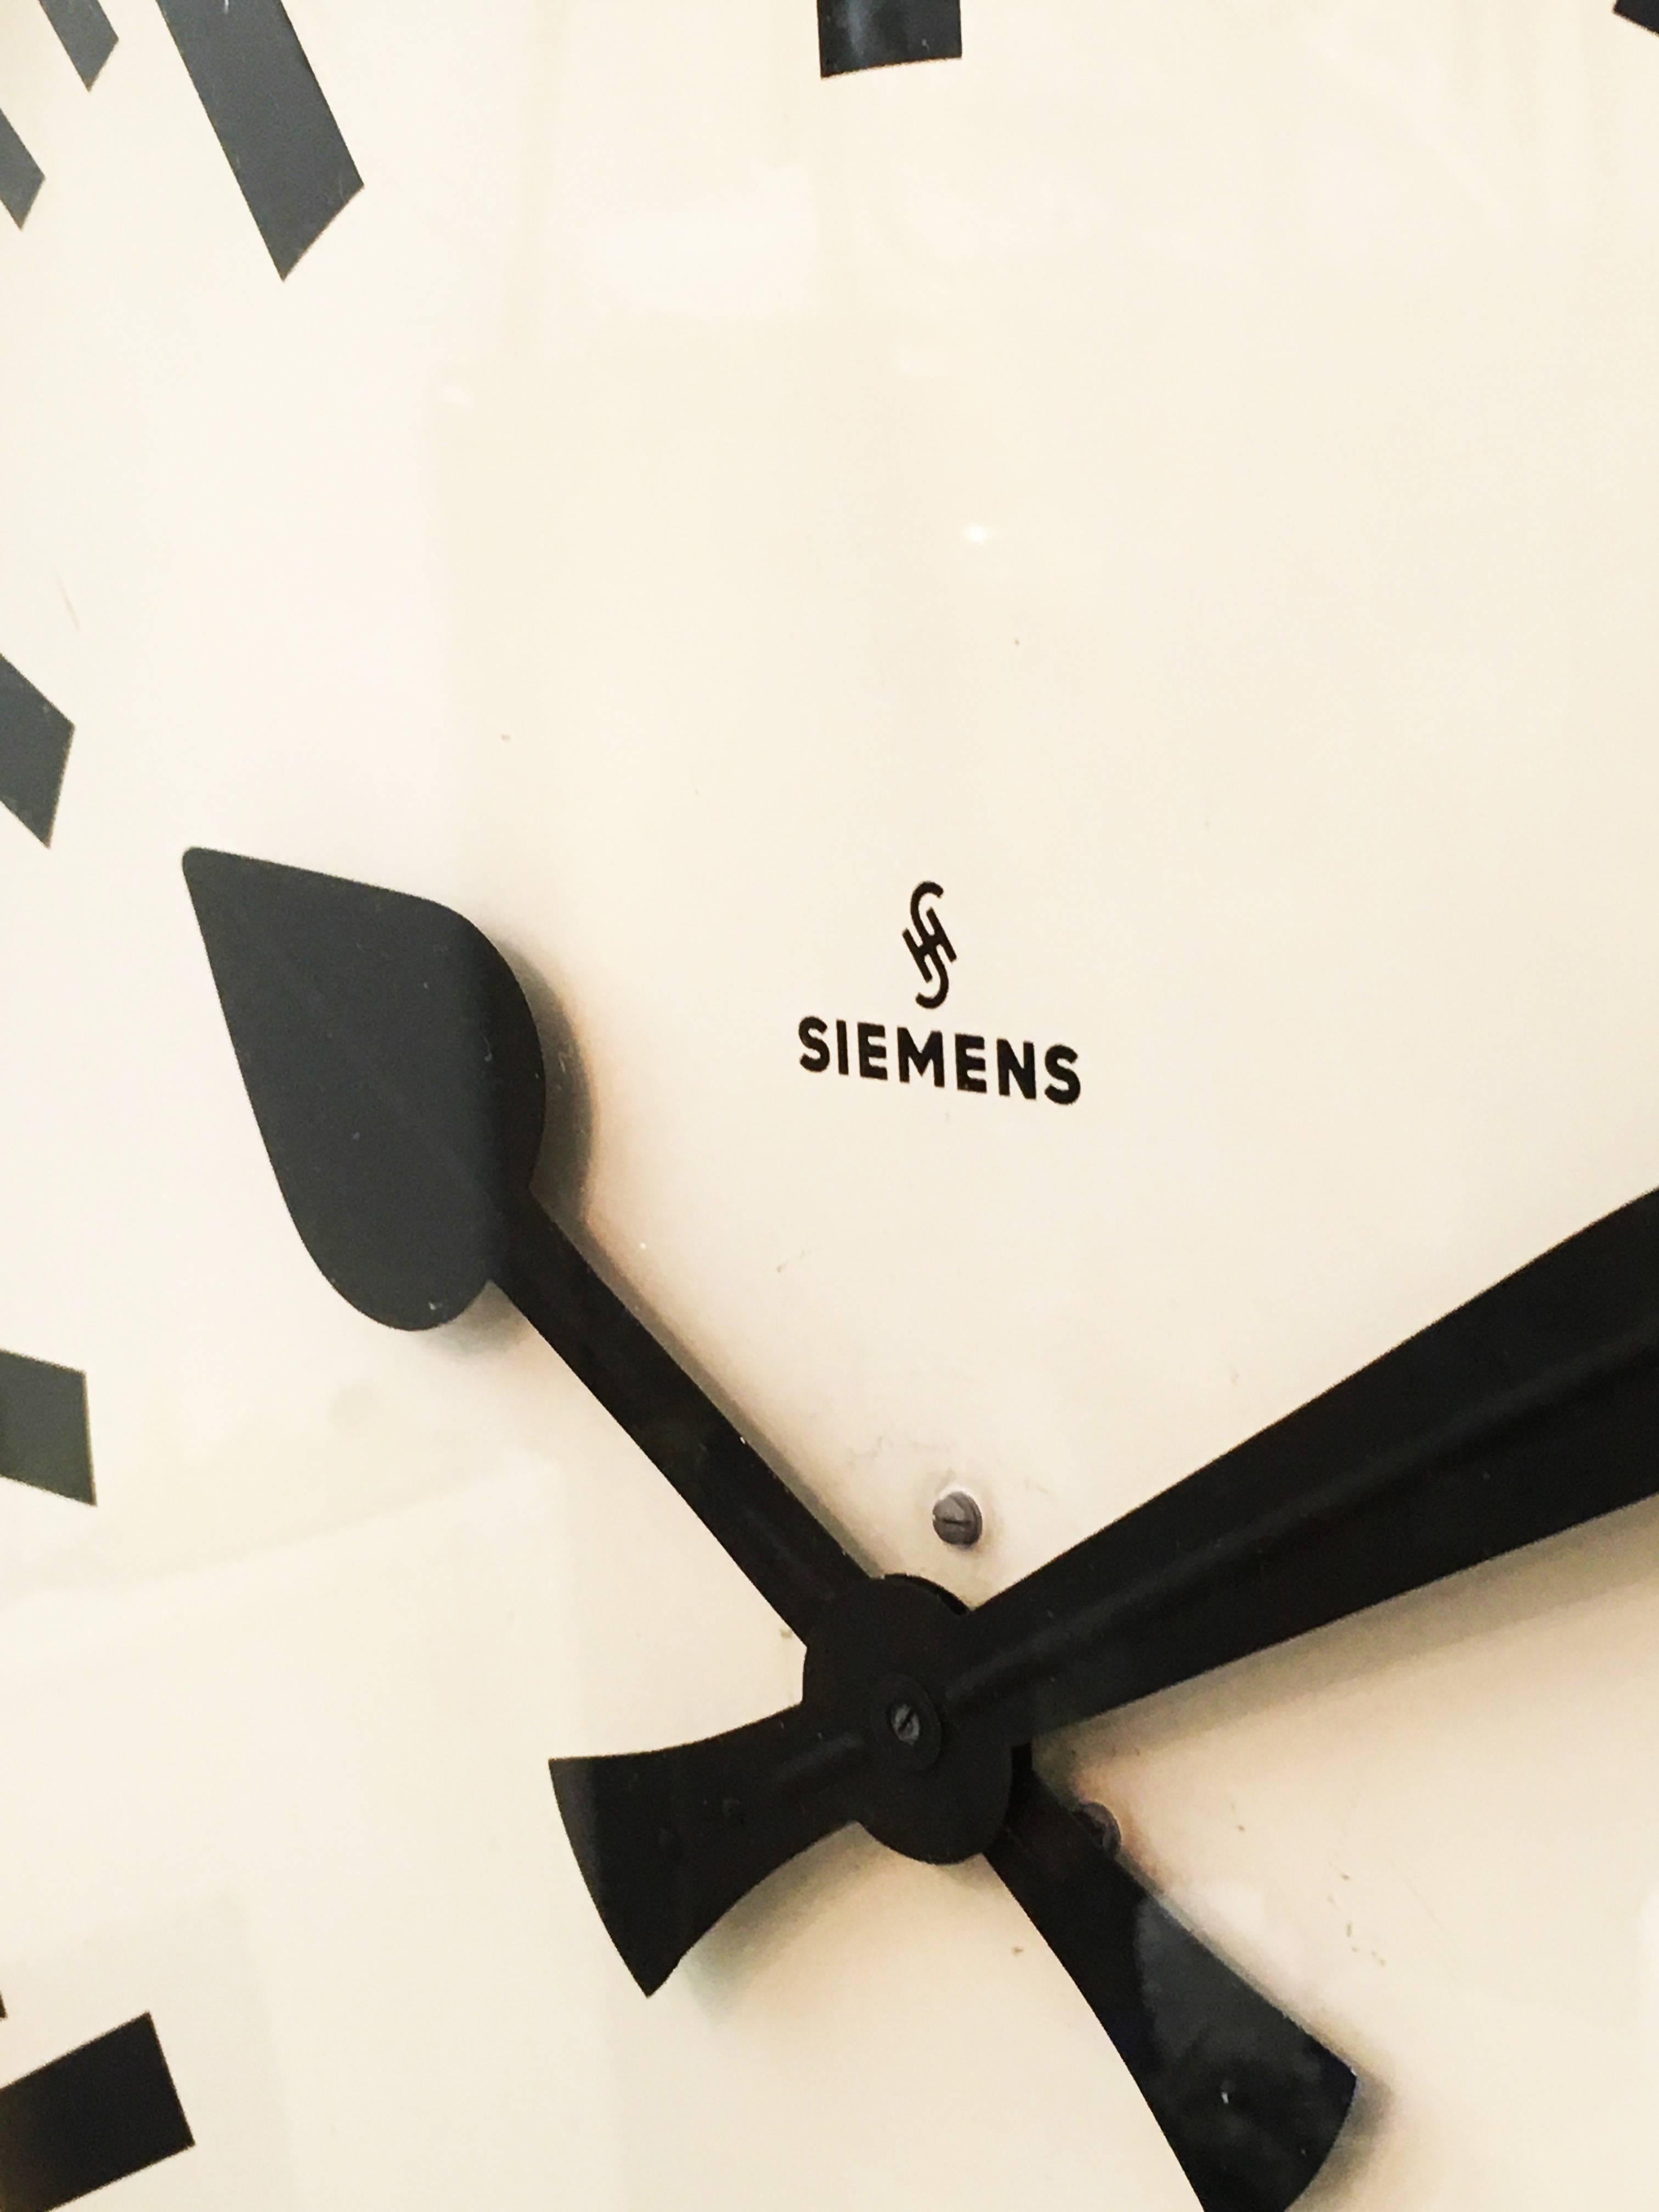 Large Siemens Industrial or Station Wall Clock 4